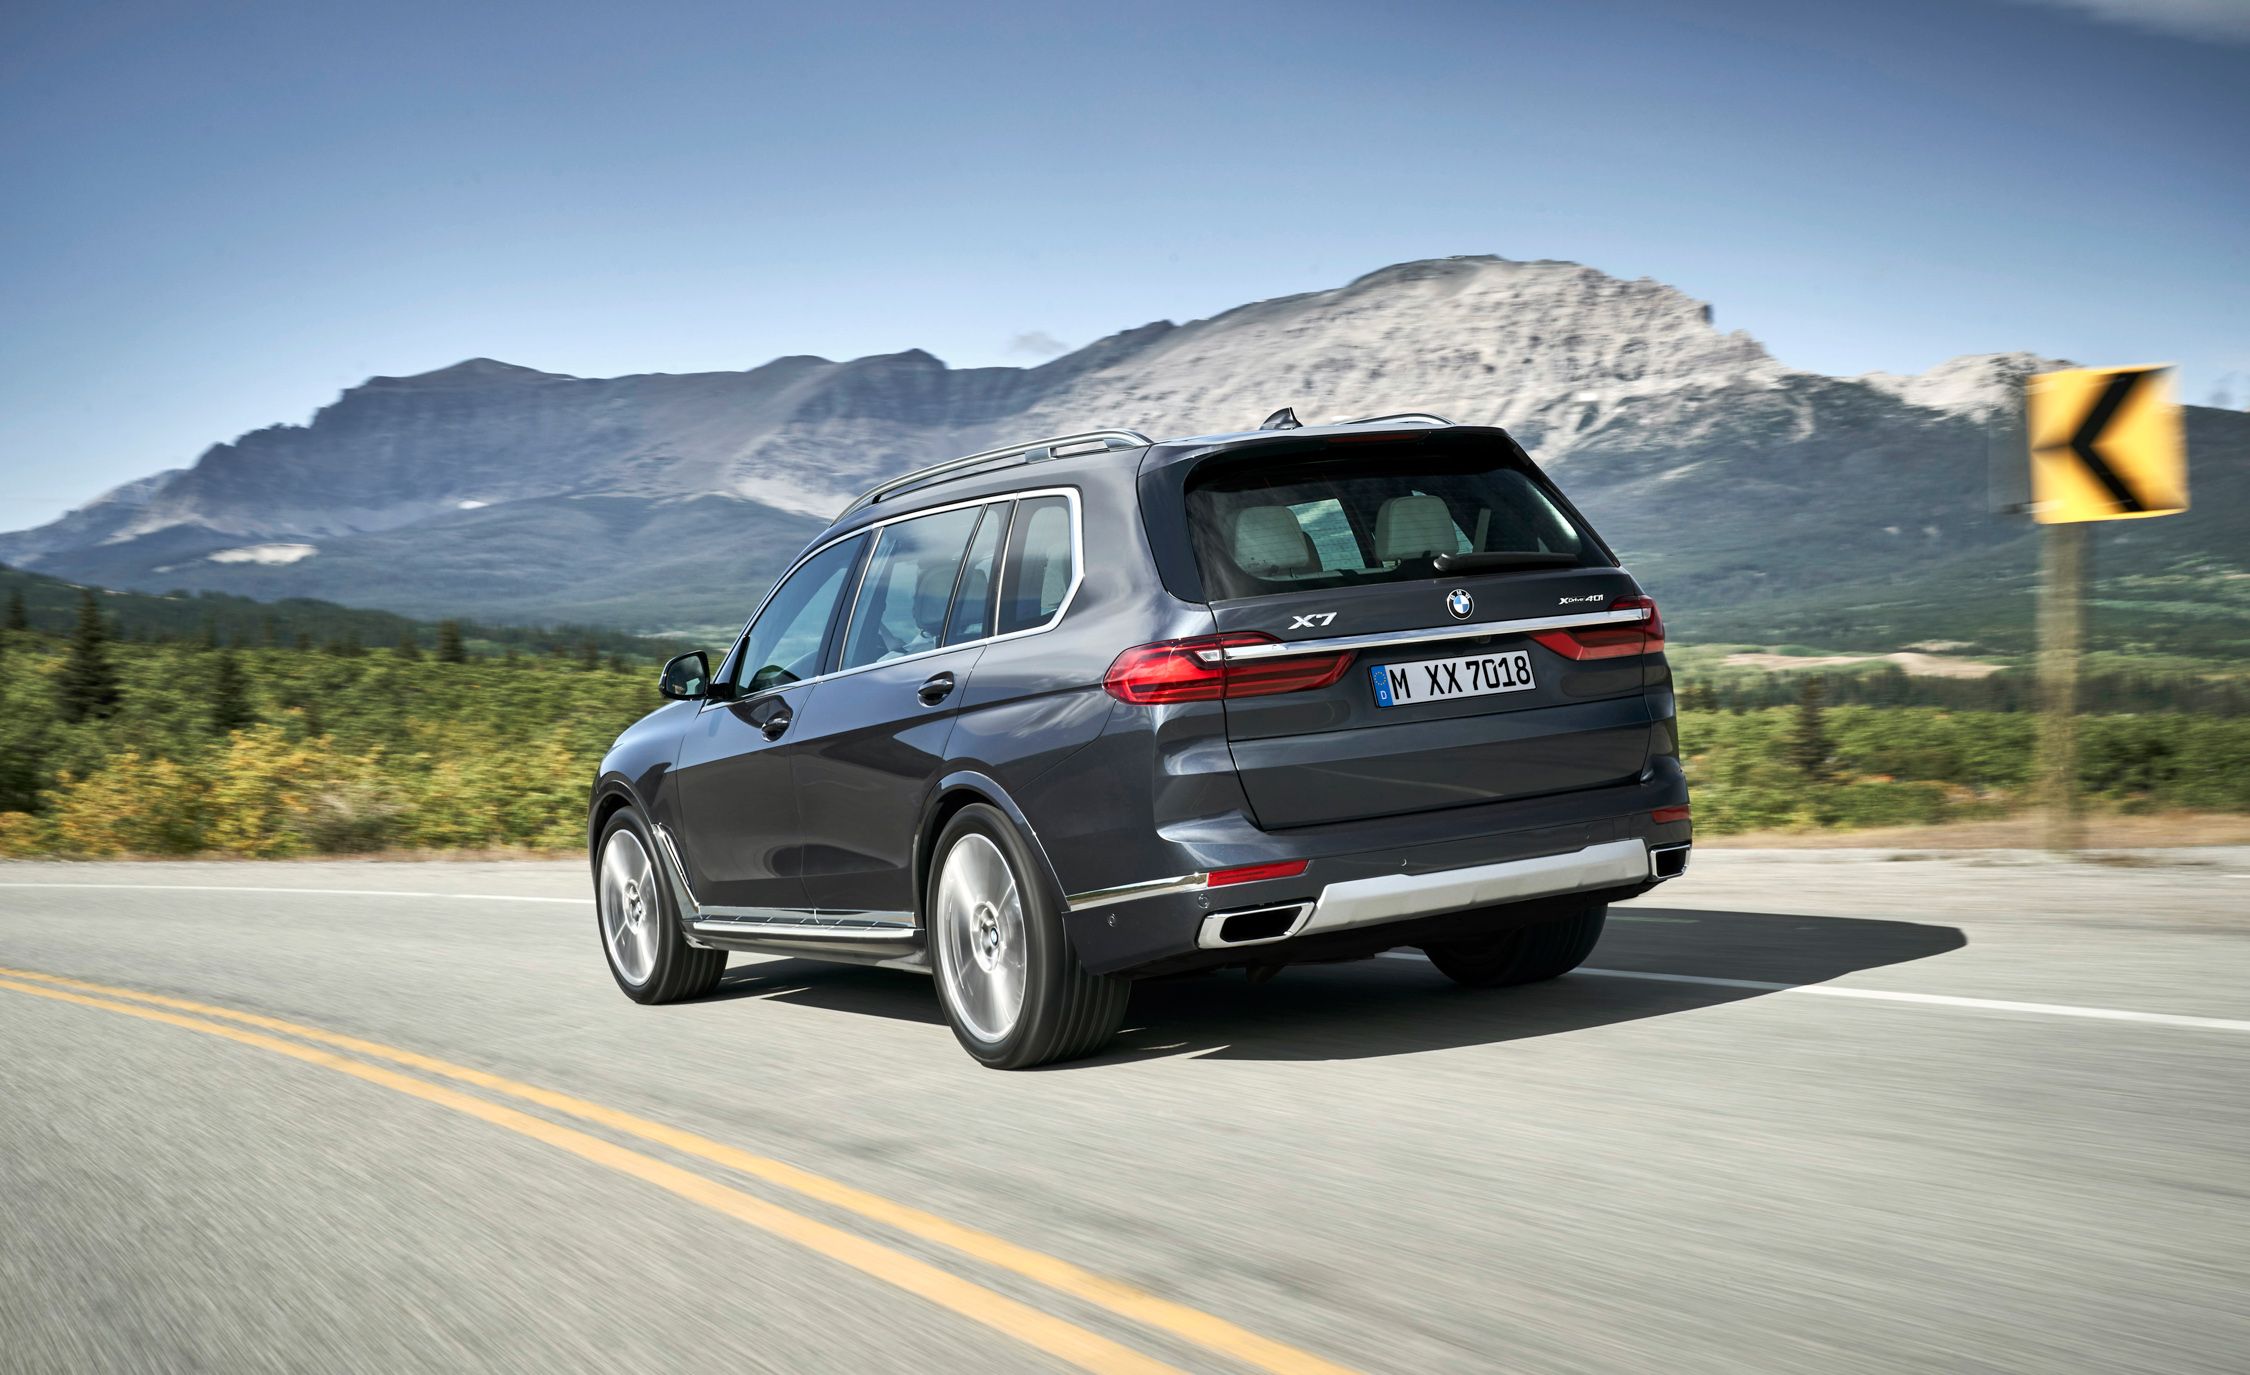 BMW X7 Reviews | BMW X7 Price, Photos, and Specs | Car and Driver